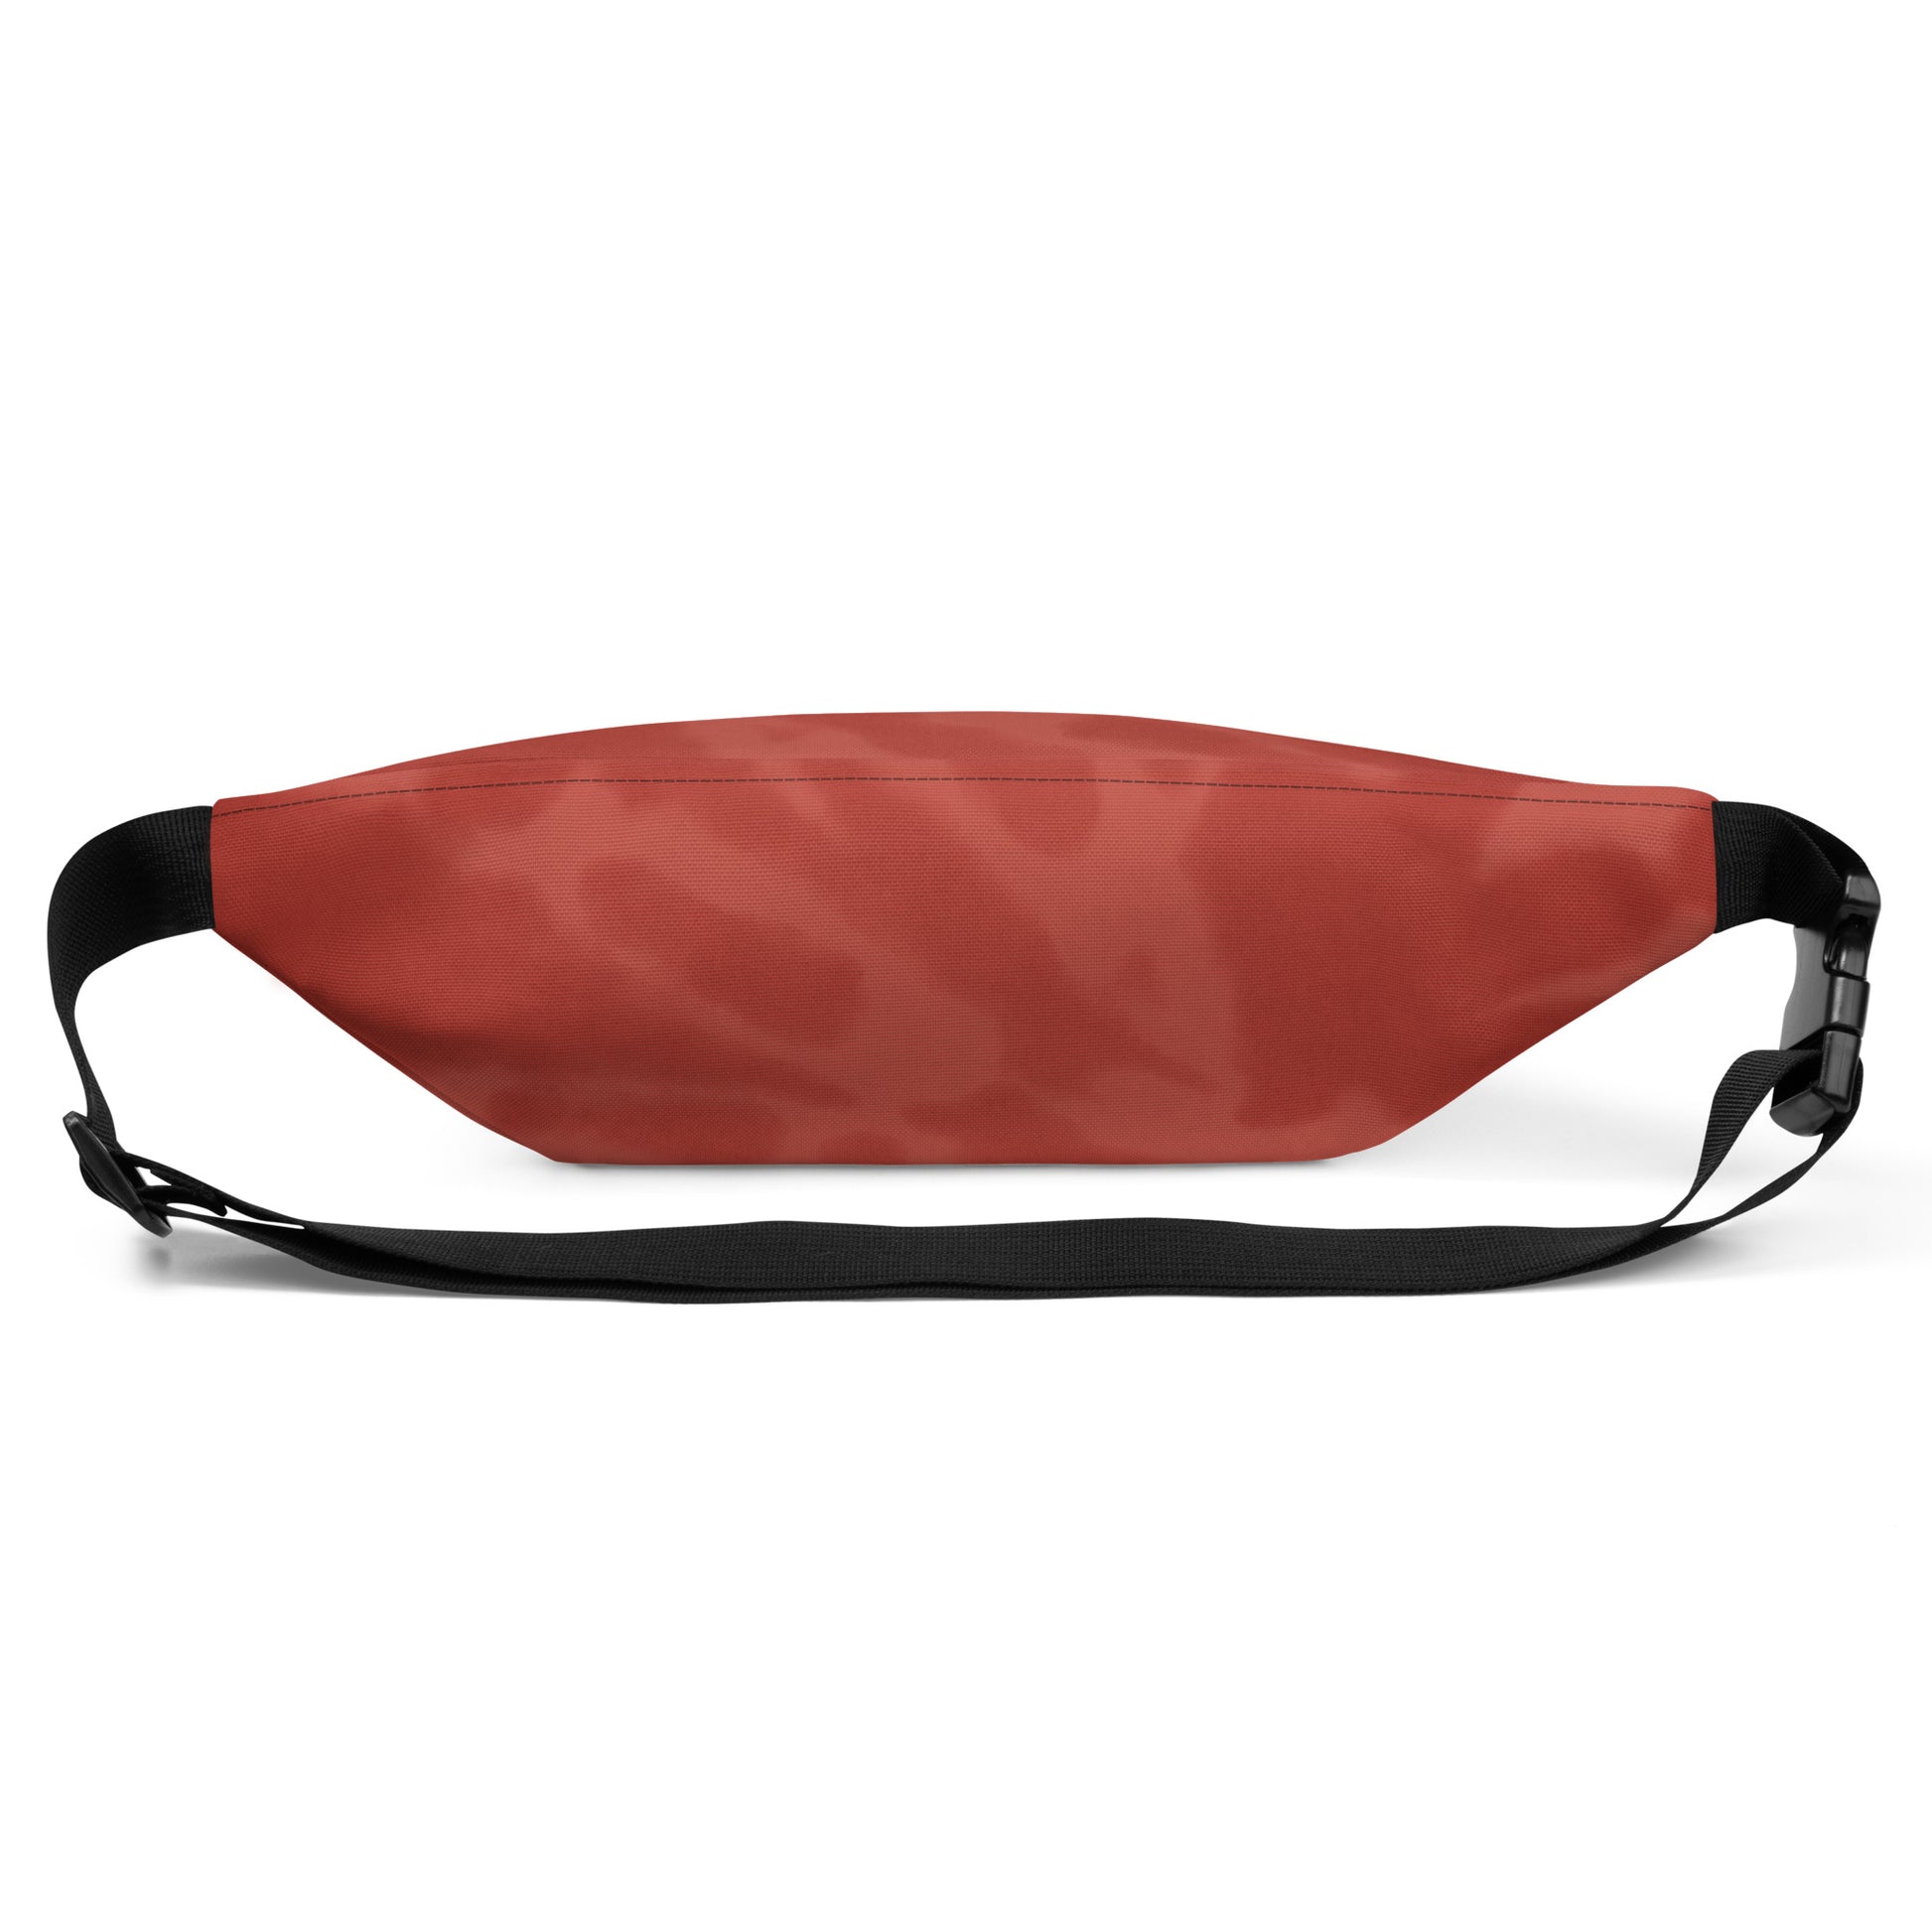 Travel Gift Fanny Pack - Red Tie-Dye • OGG Maui • YHM Designs - Image 09